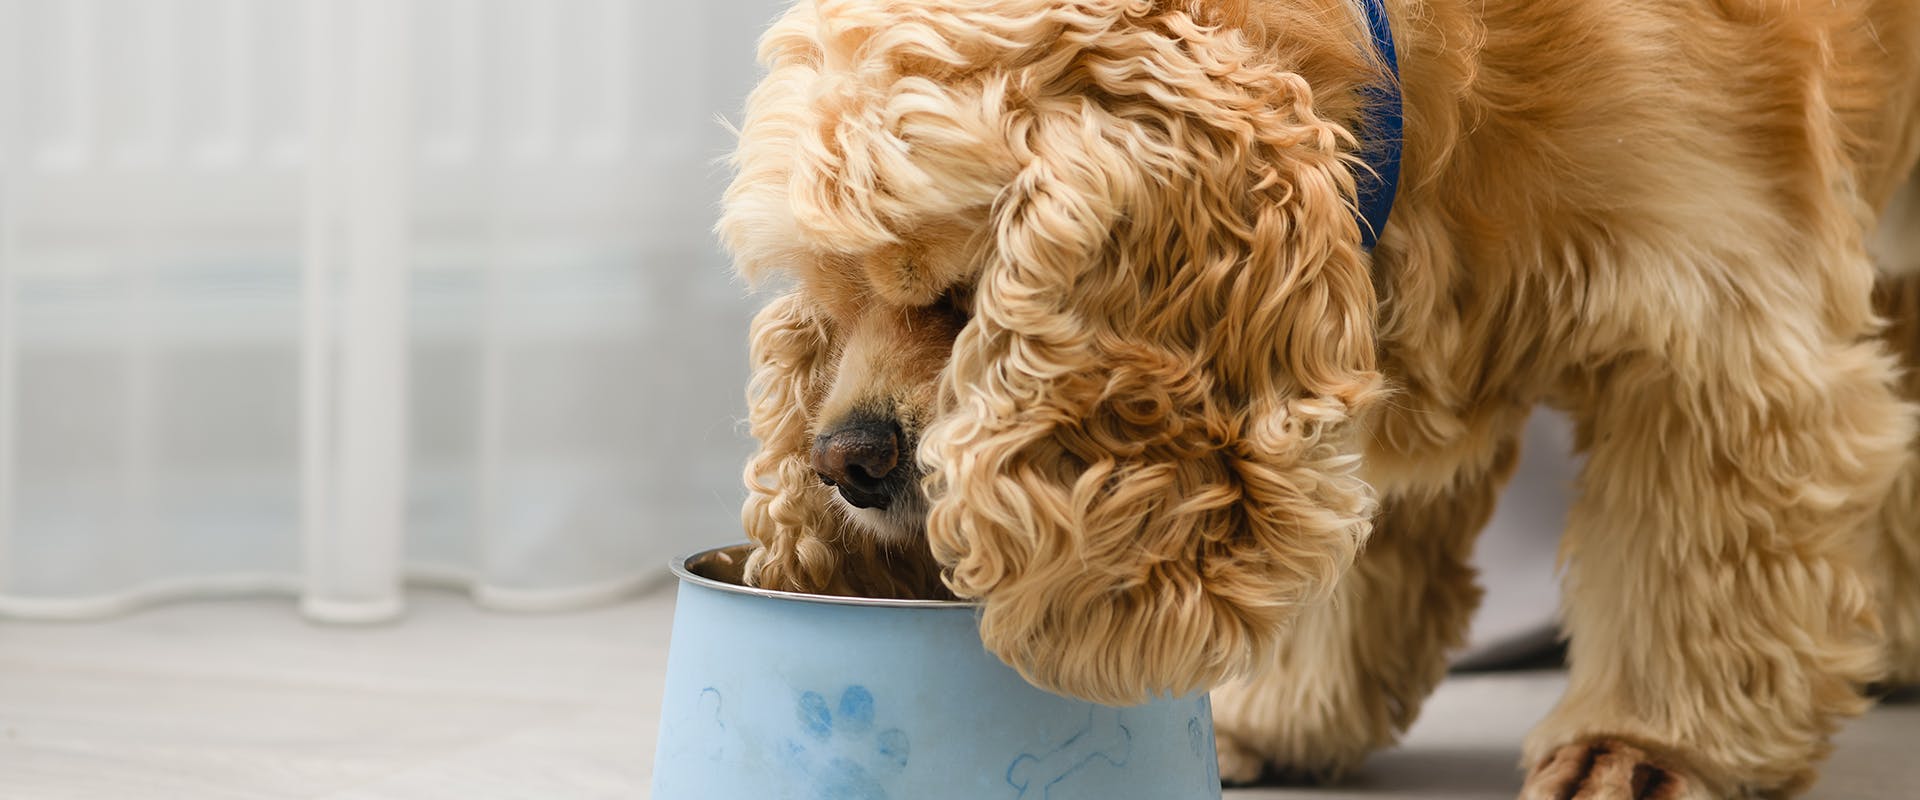 Best Dog Fool Bowls in 2019: Our Pets, GPET, Outward Hound, and More